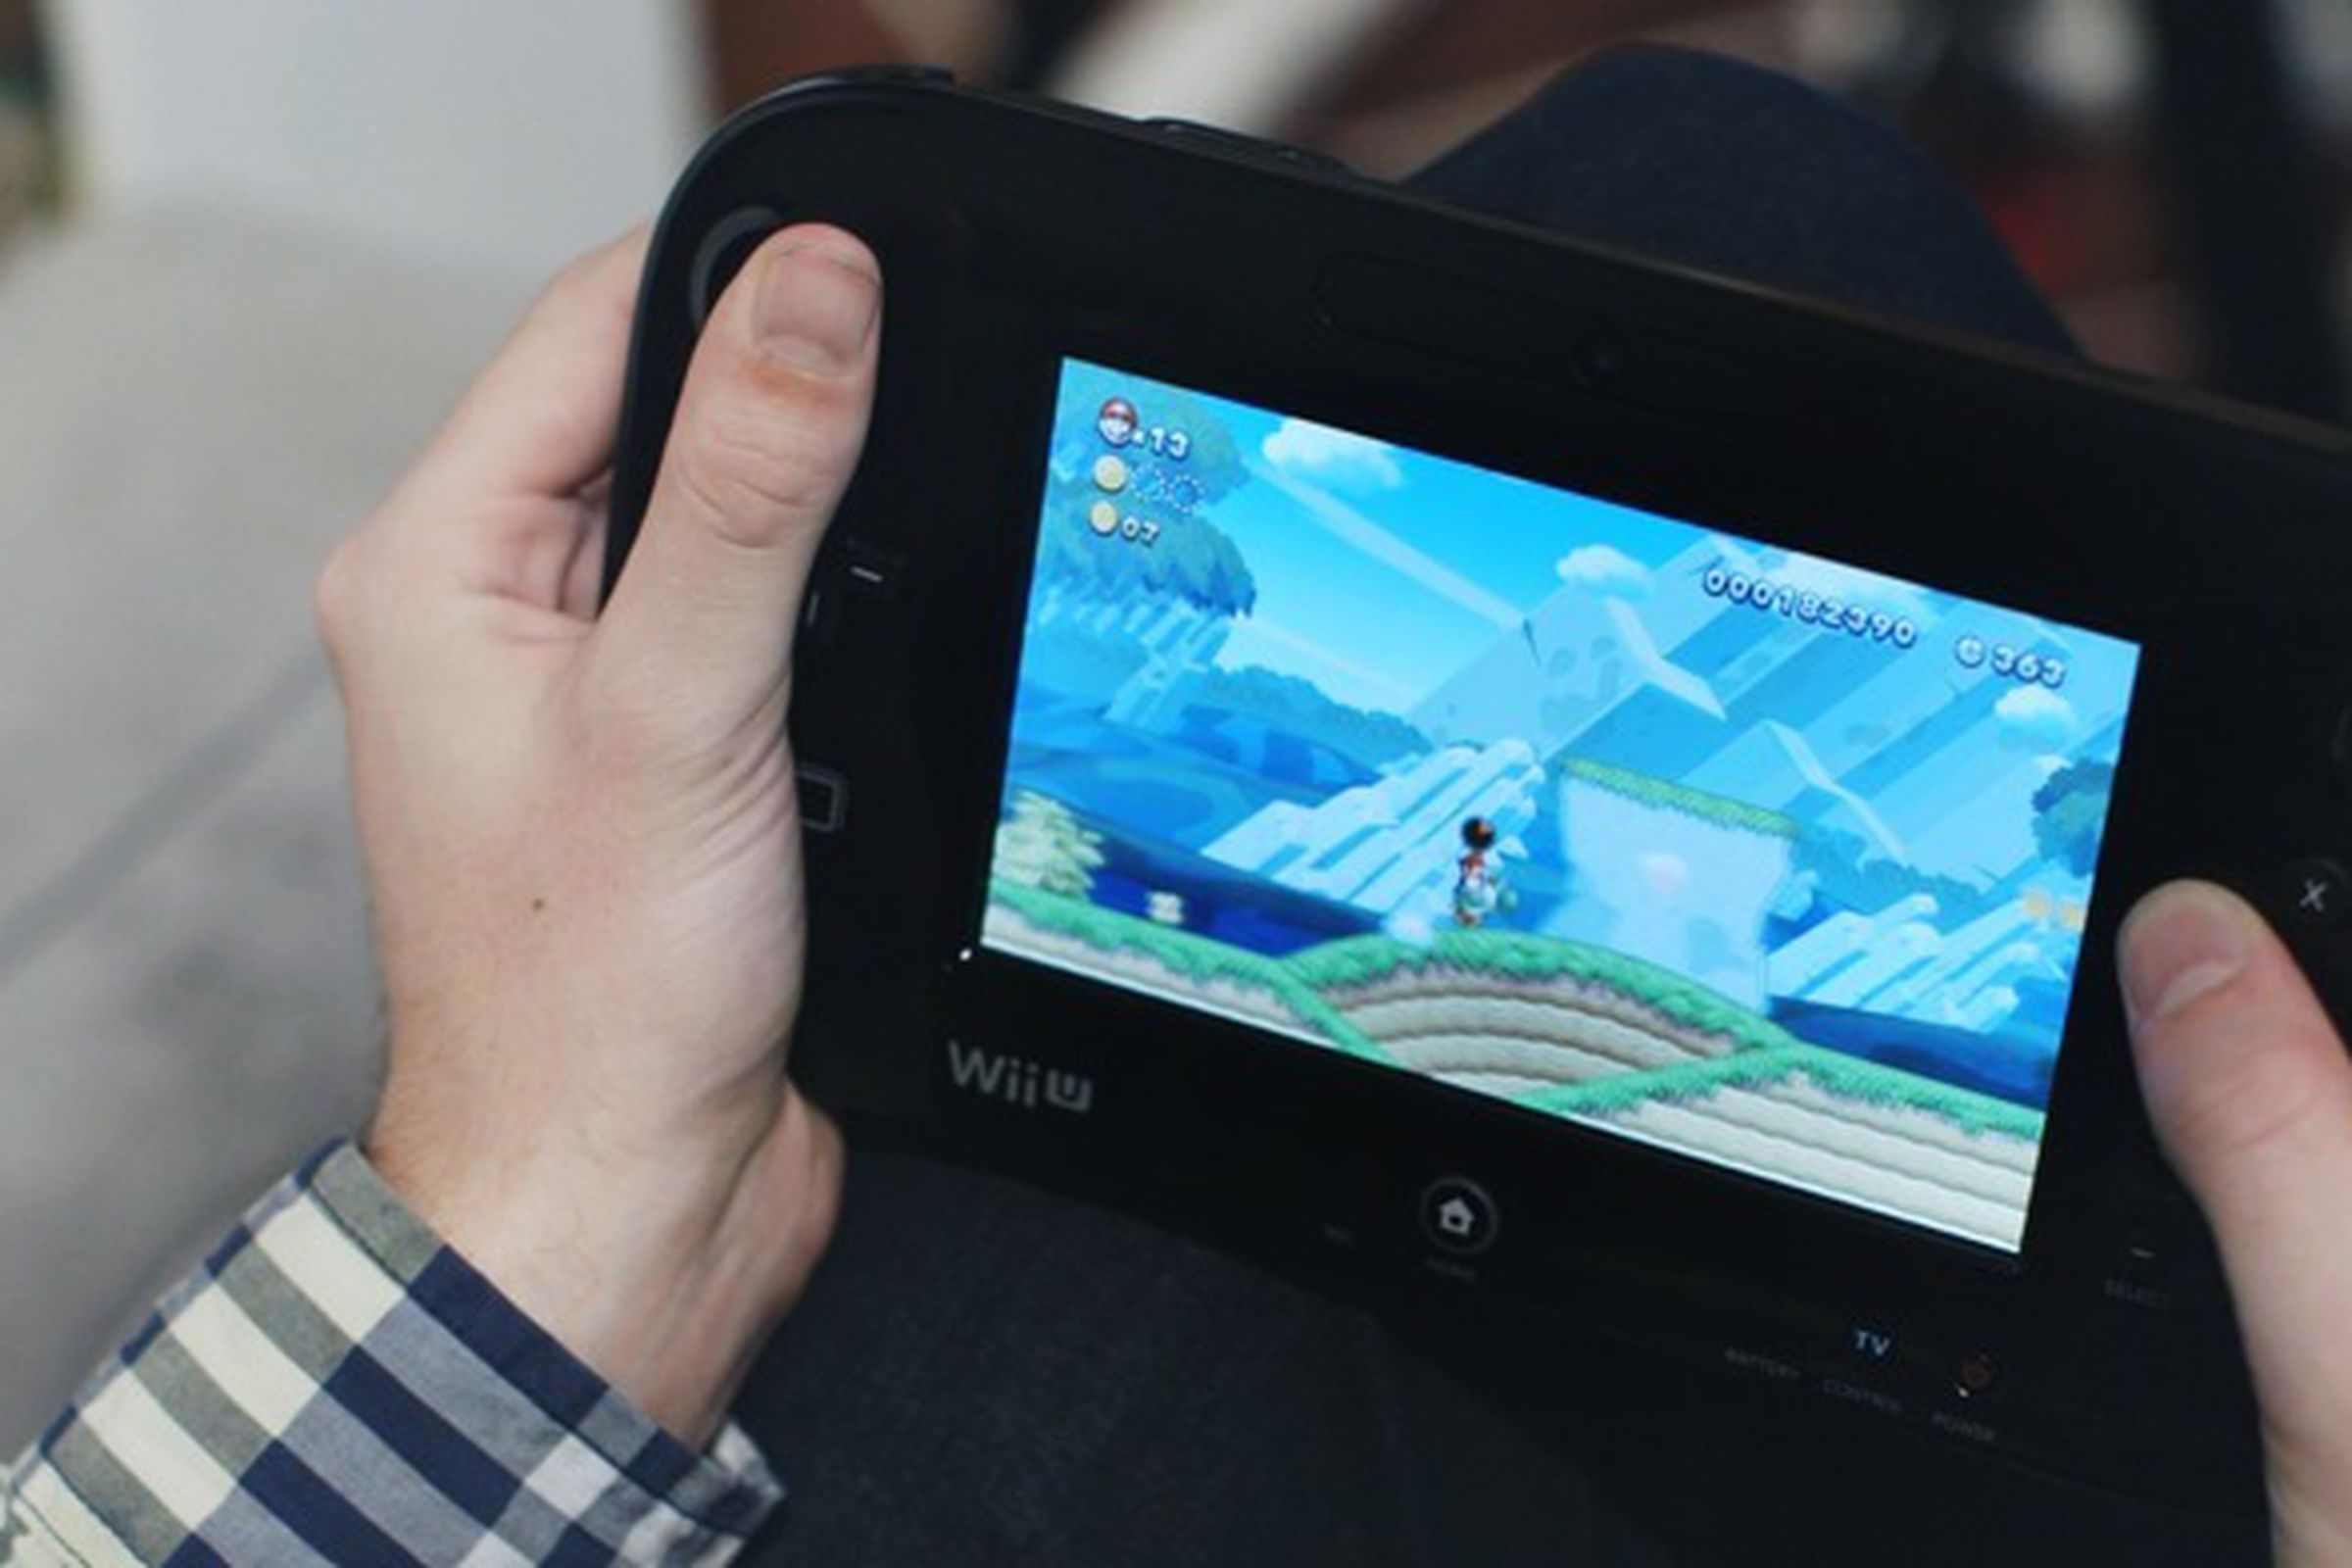 A photo showing someone playing the Wii U